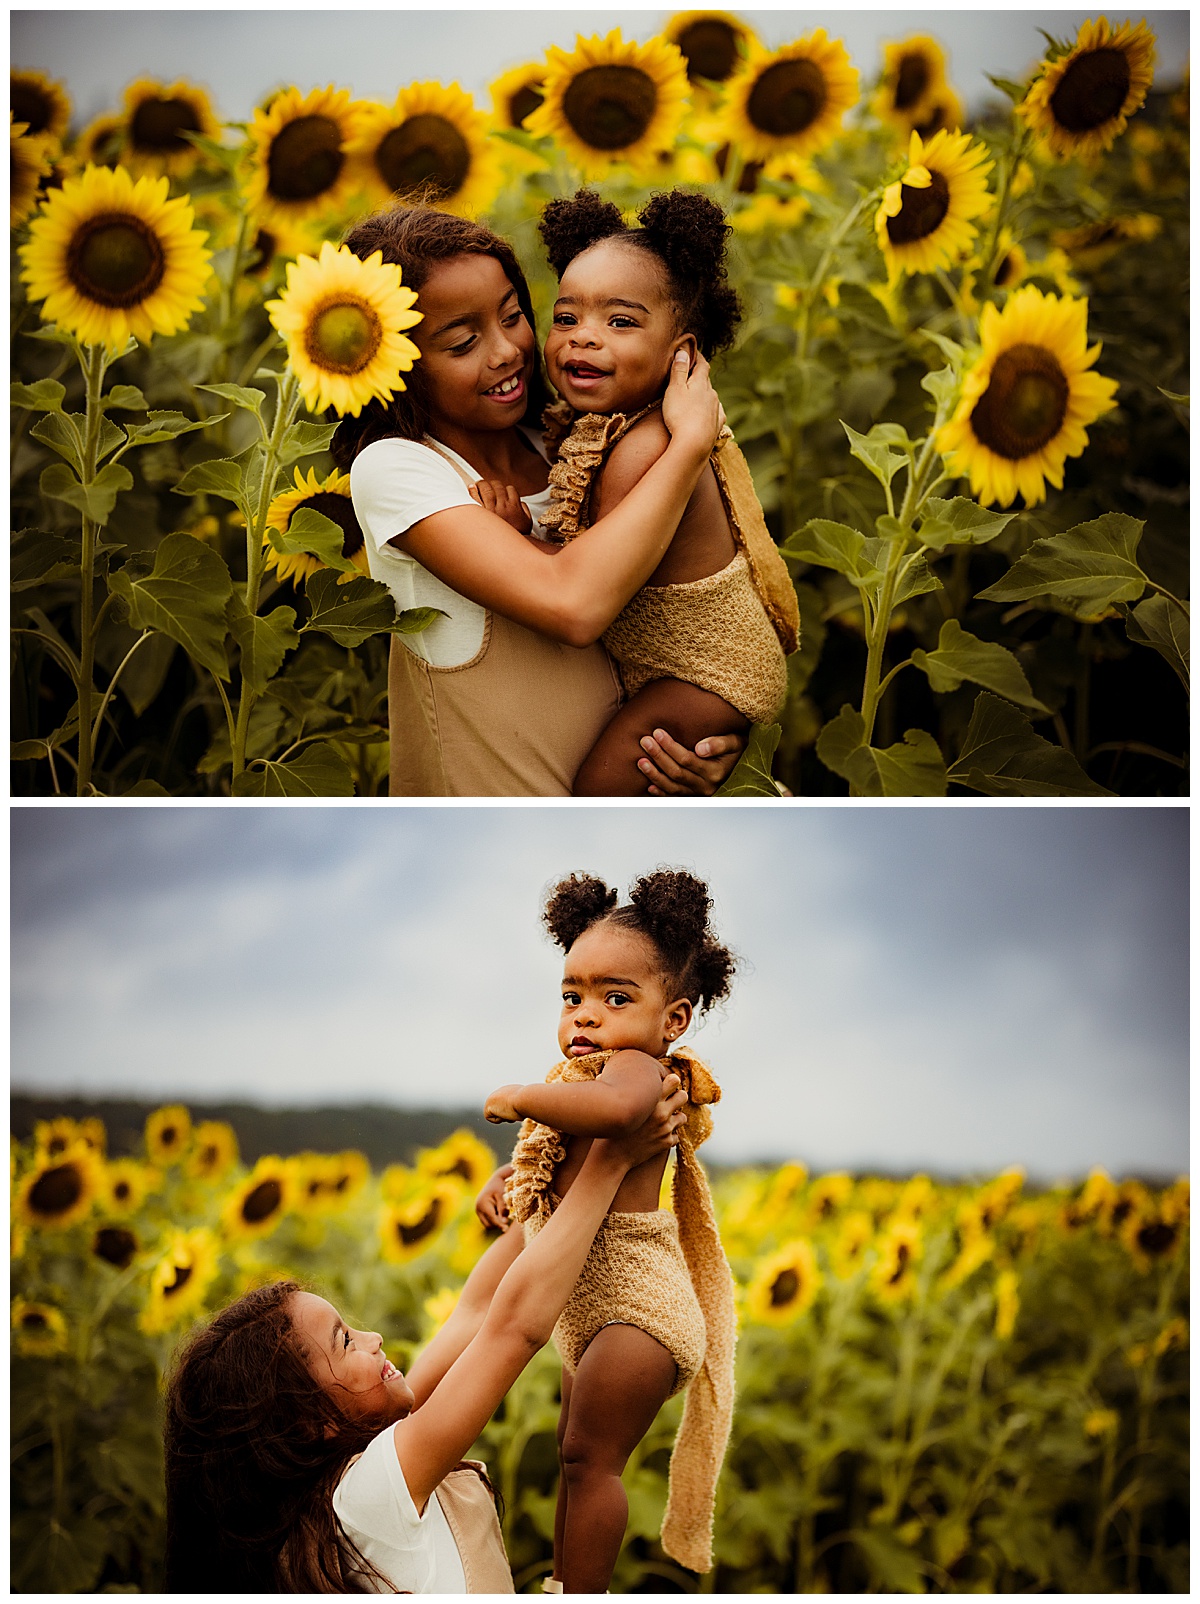 Daughter smile together during their sunflower photoshoot